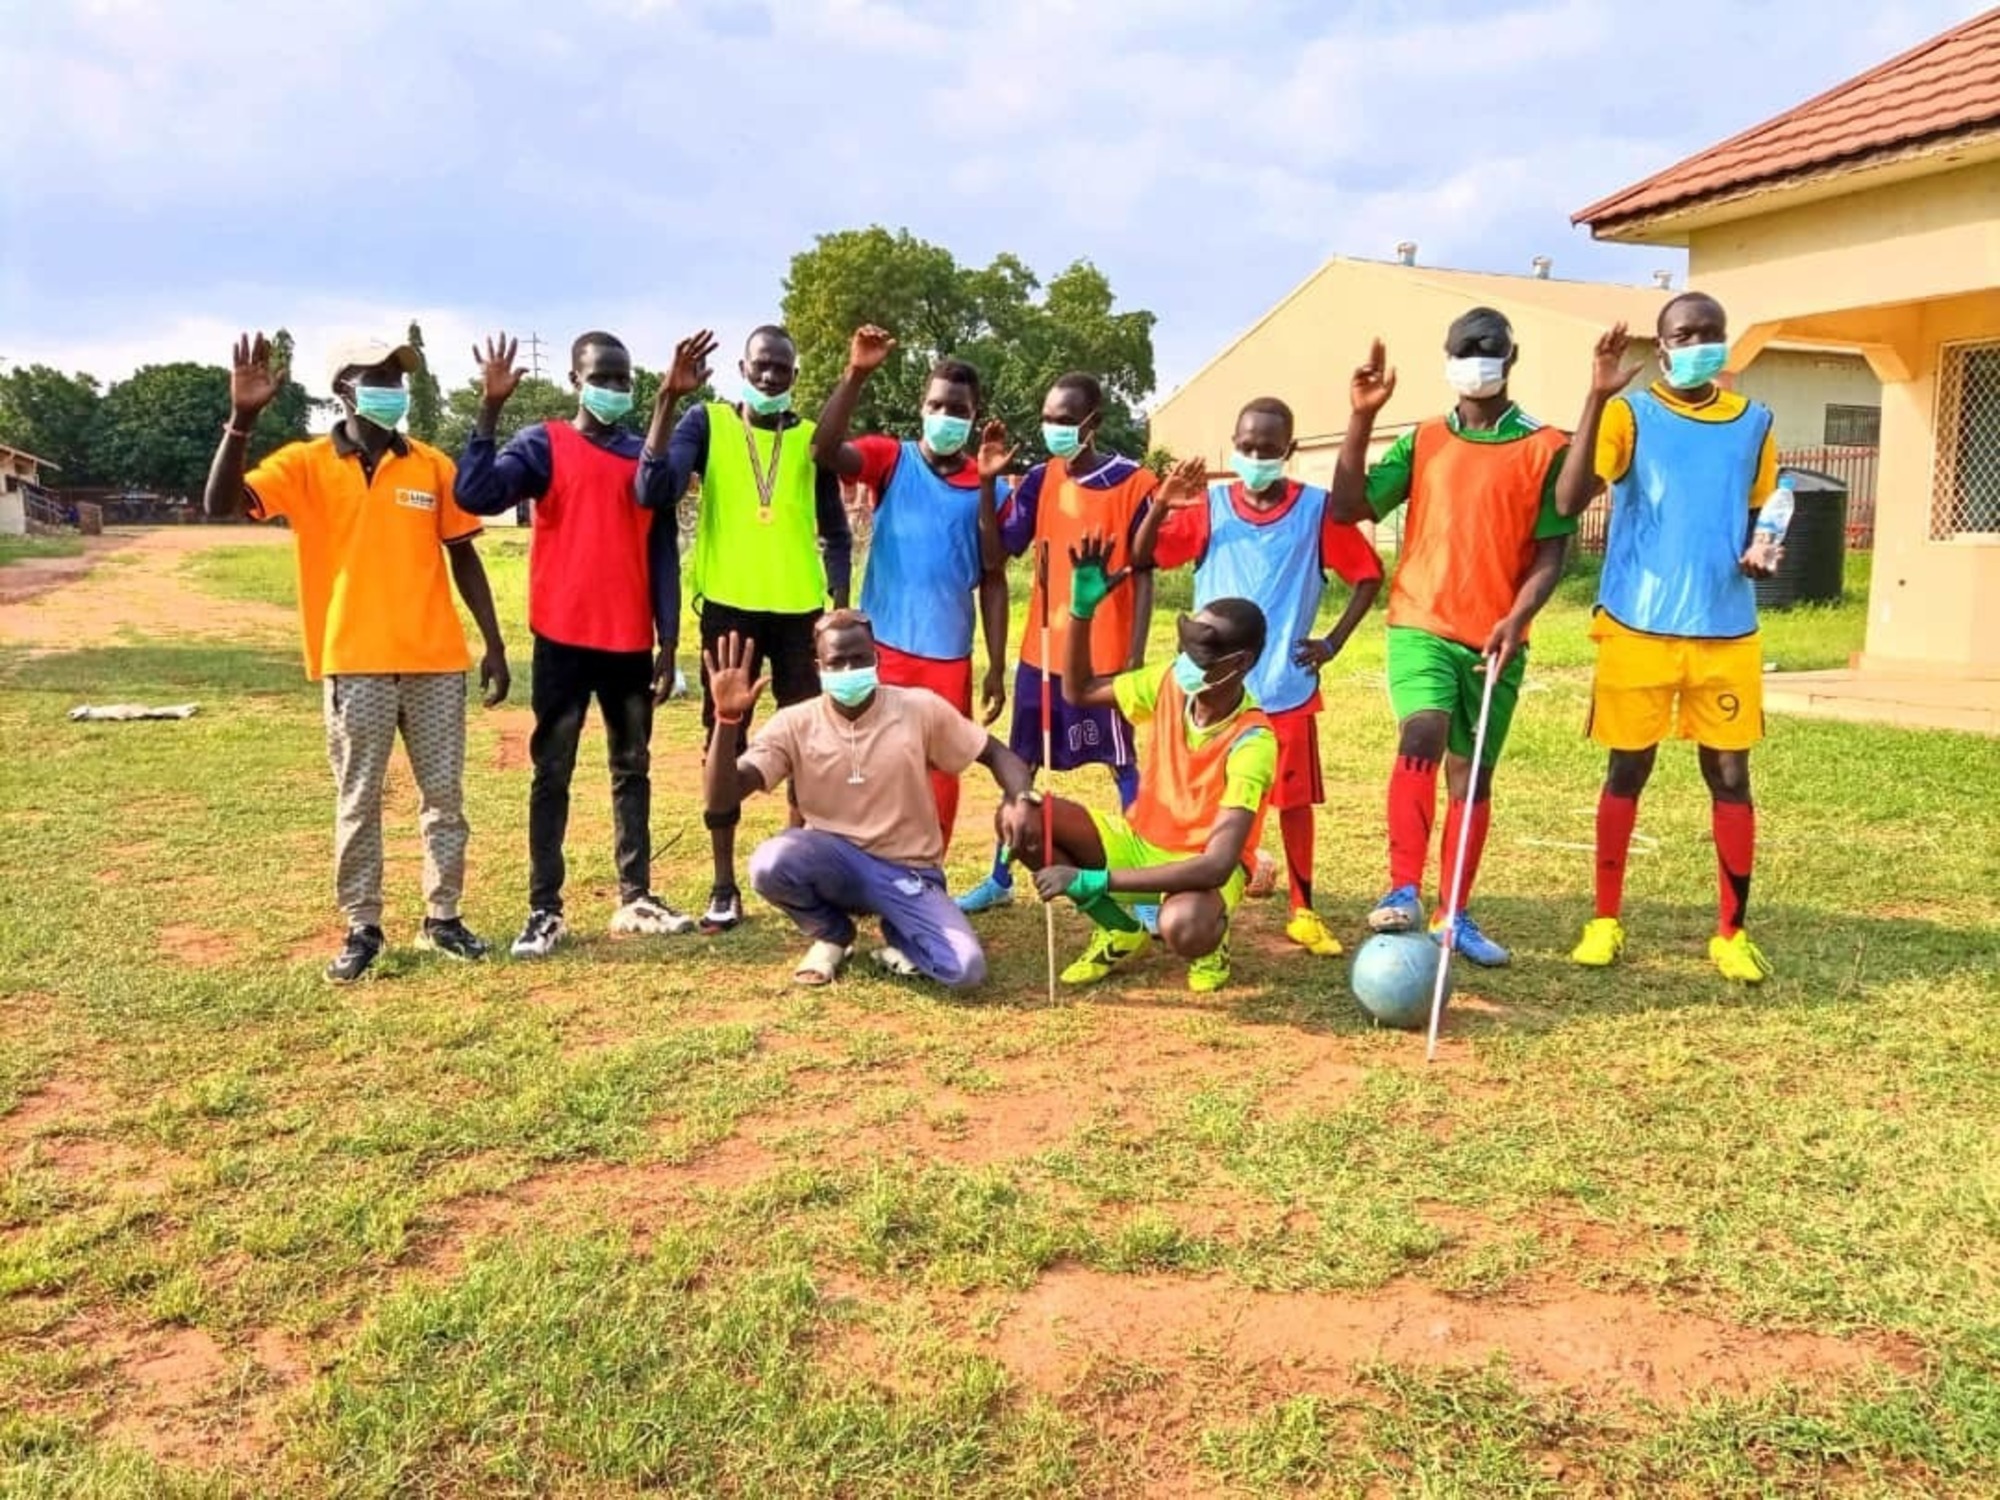 members of South Sudan's first blind football team dressed in their jerseys stand together raising their right hand to show their support for an education campaign.